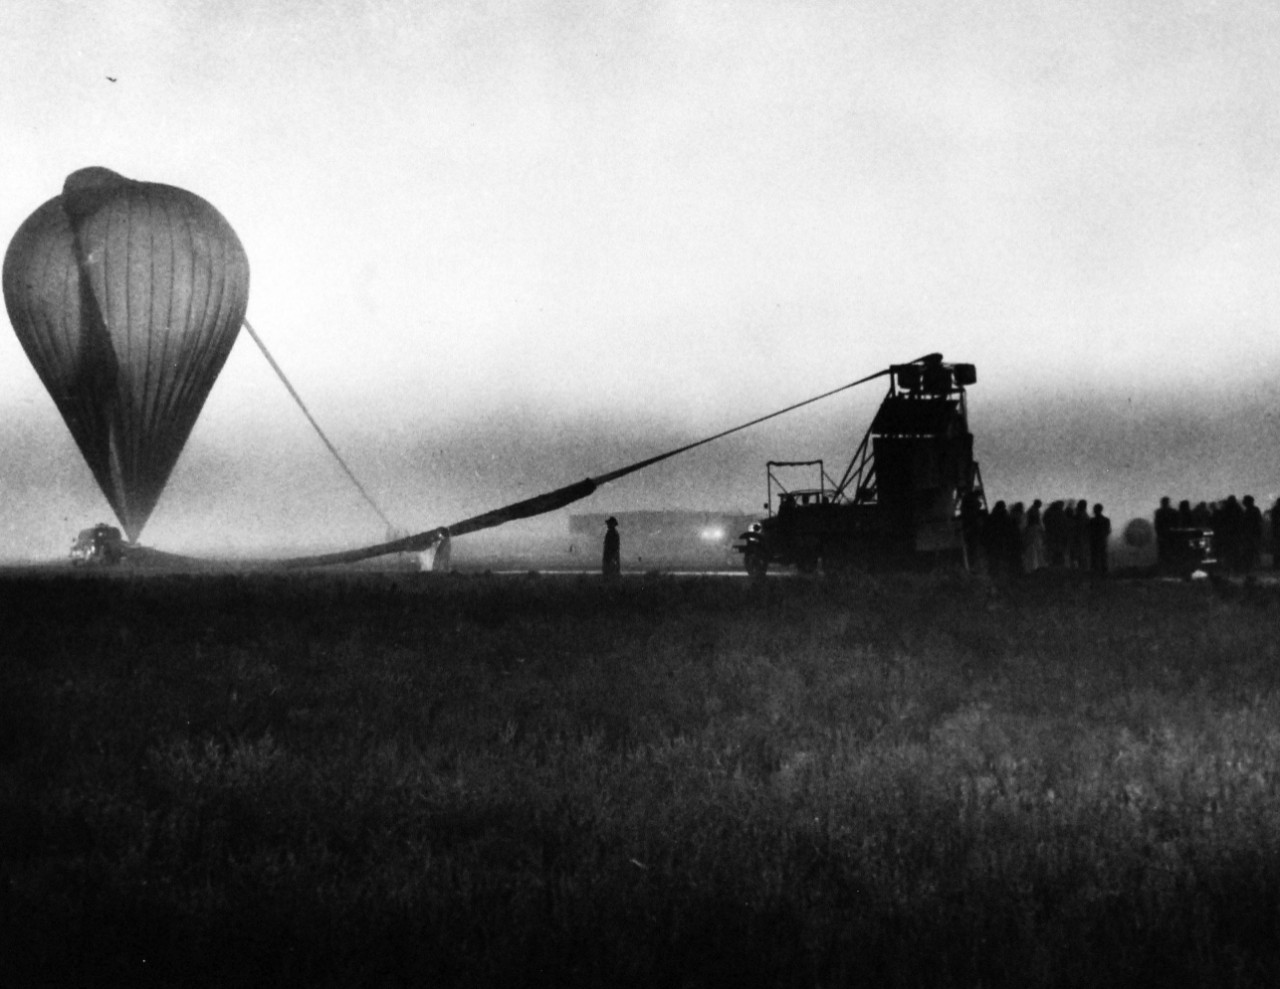 80-G-709969:  Operation Stratoscope.  The nearly inflated balloon, the cargo parachute and the instrument payload mounted on the rear of the launching vehicle are visible through the fog on the morning of the launching, September 25, 1957.  Official U.S. Navy photograph, now in the collections of the National Archives.     